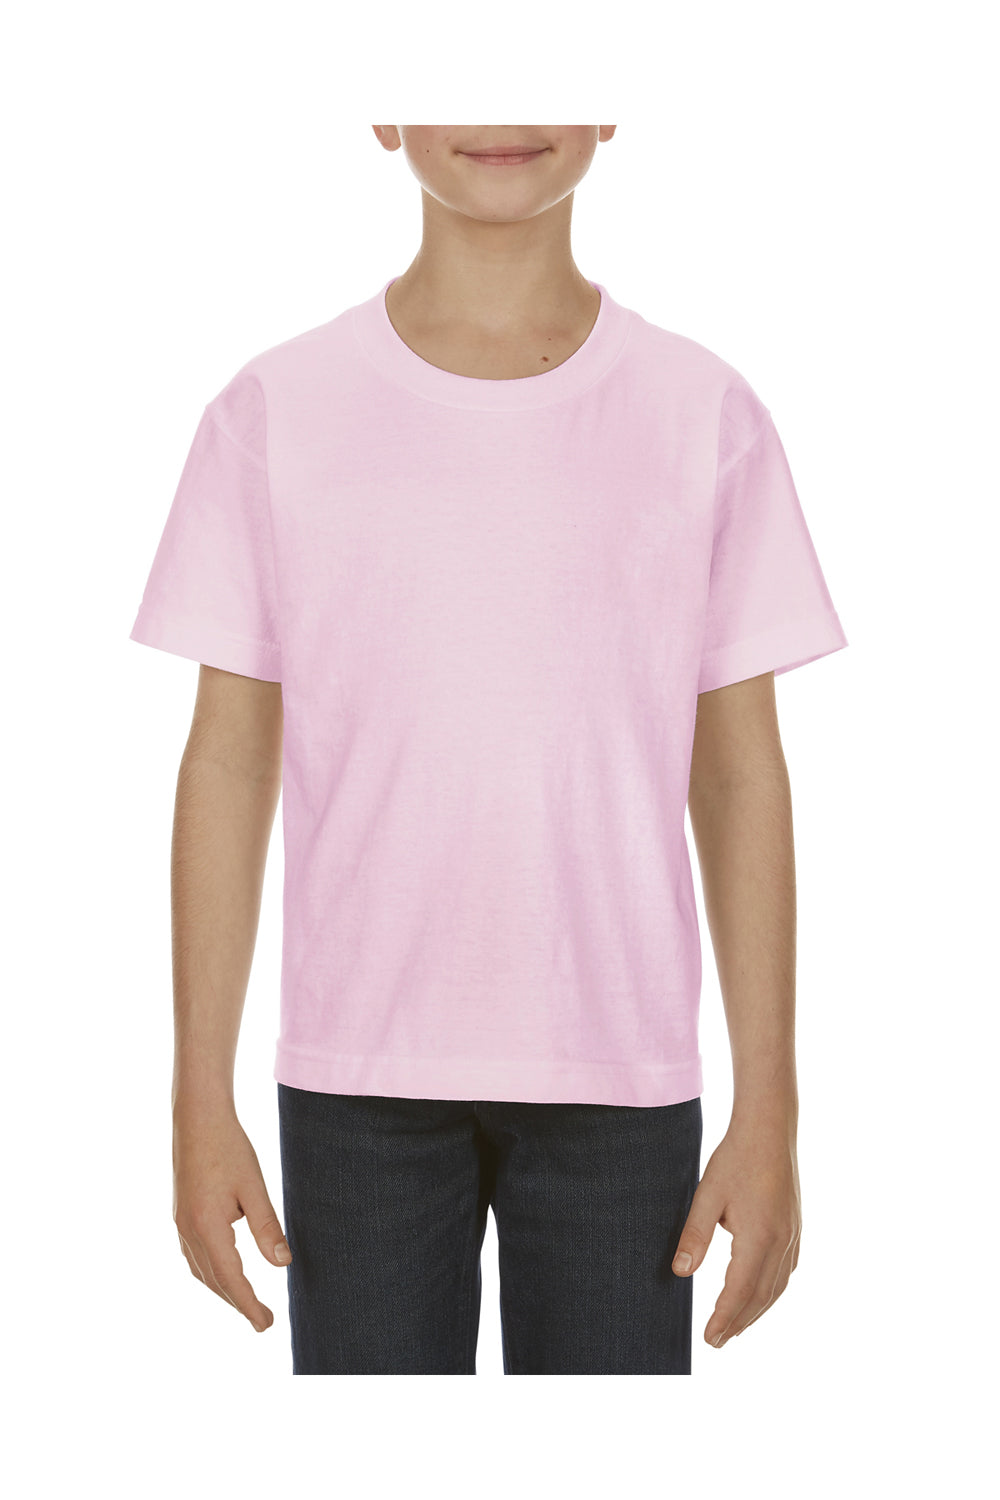 Alstyle AL3381 Youth Short Sleeve Crewneck T-Shirt Pink Front